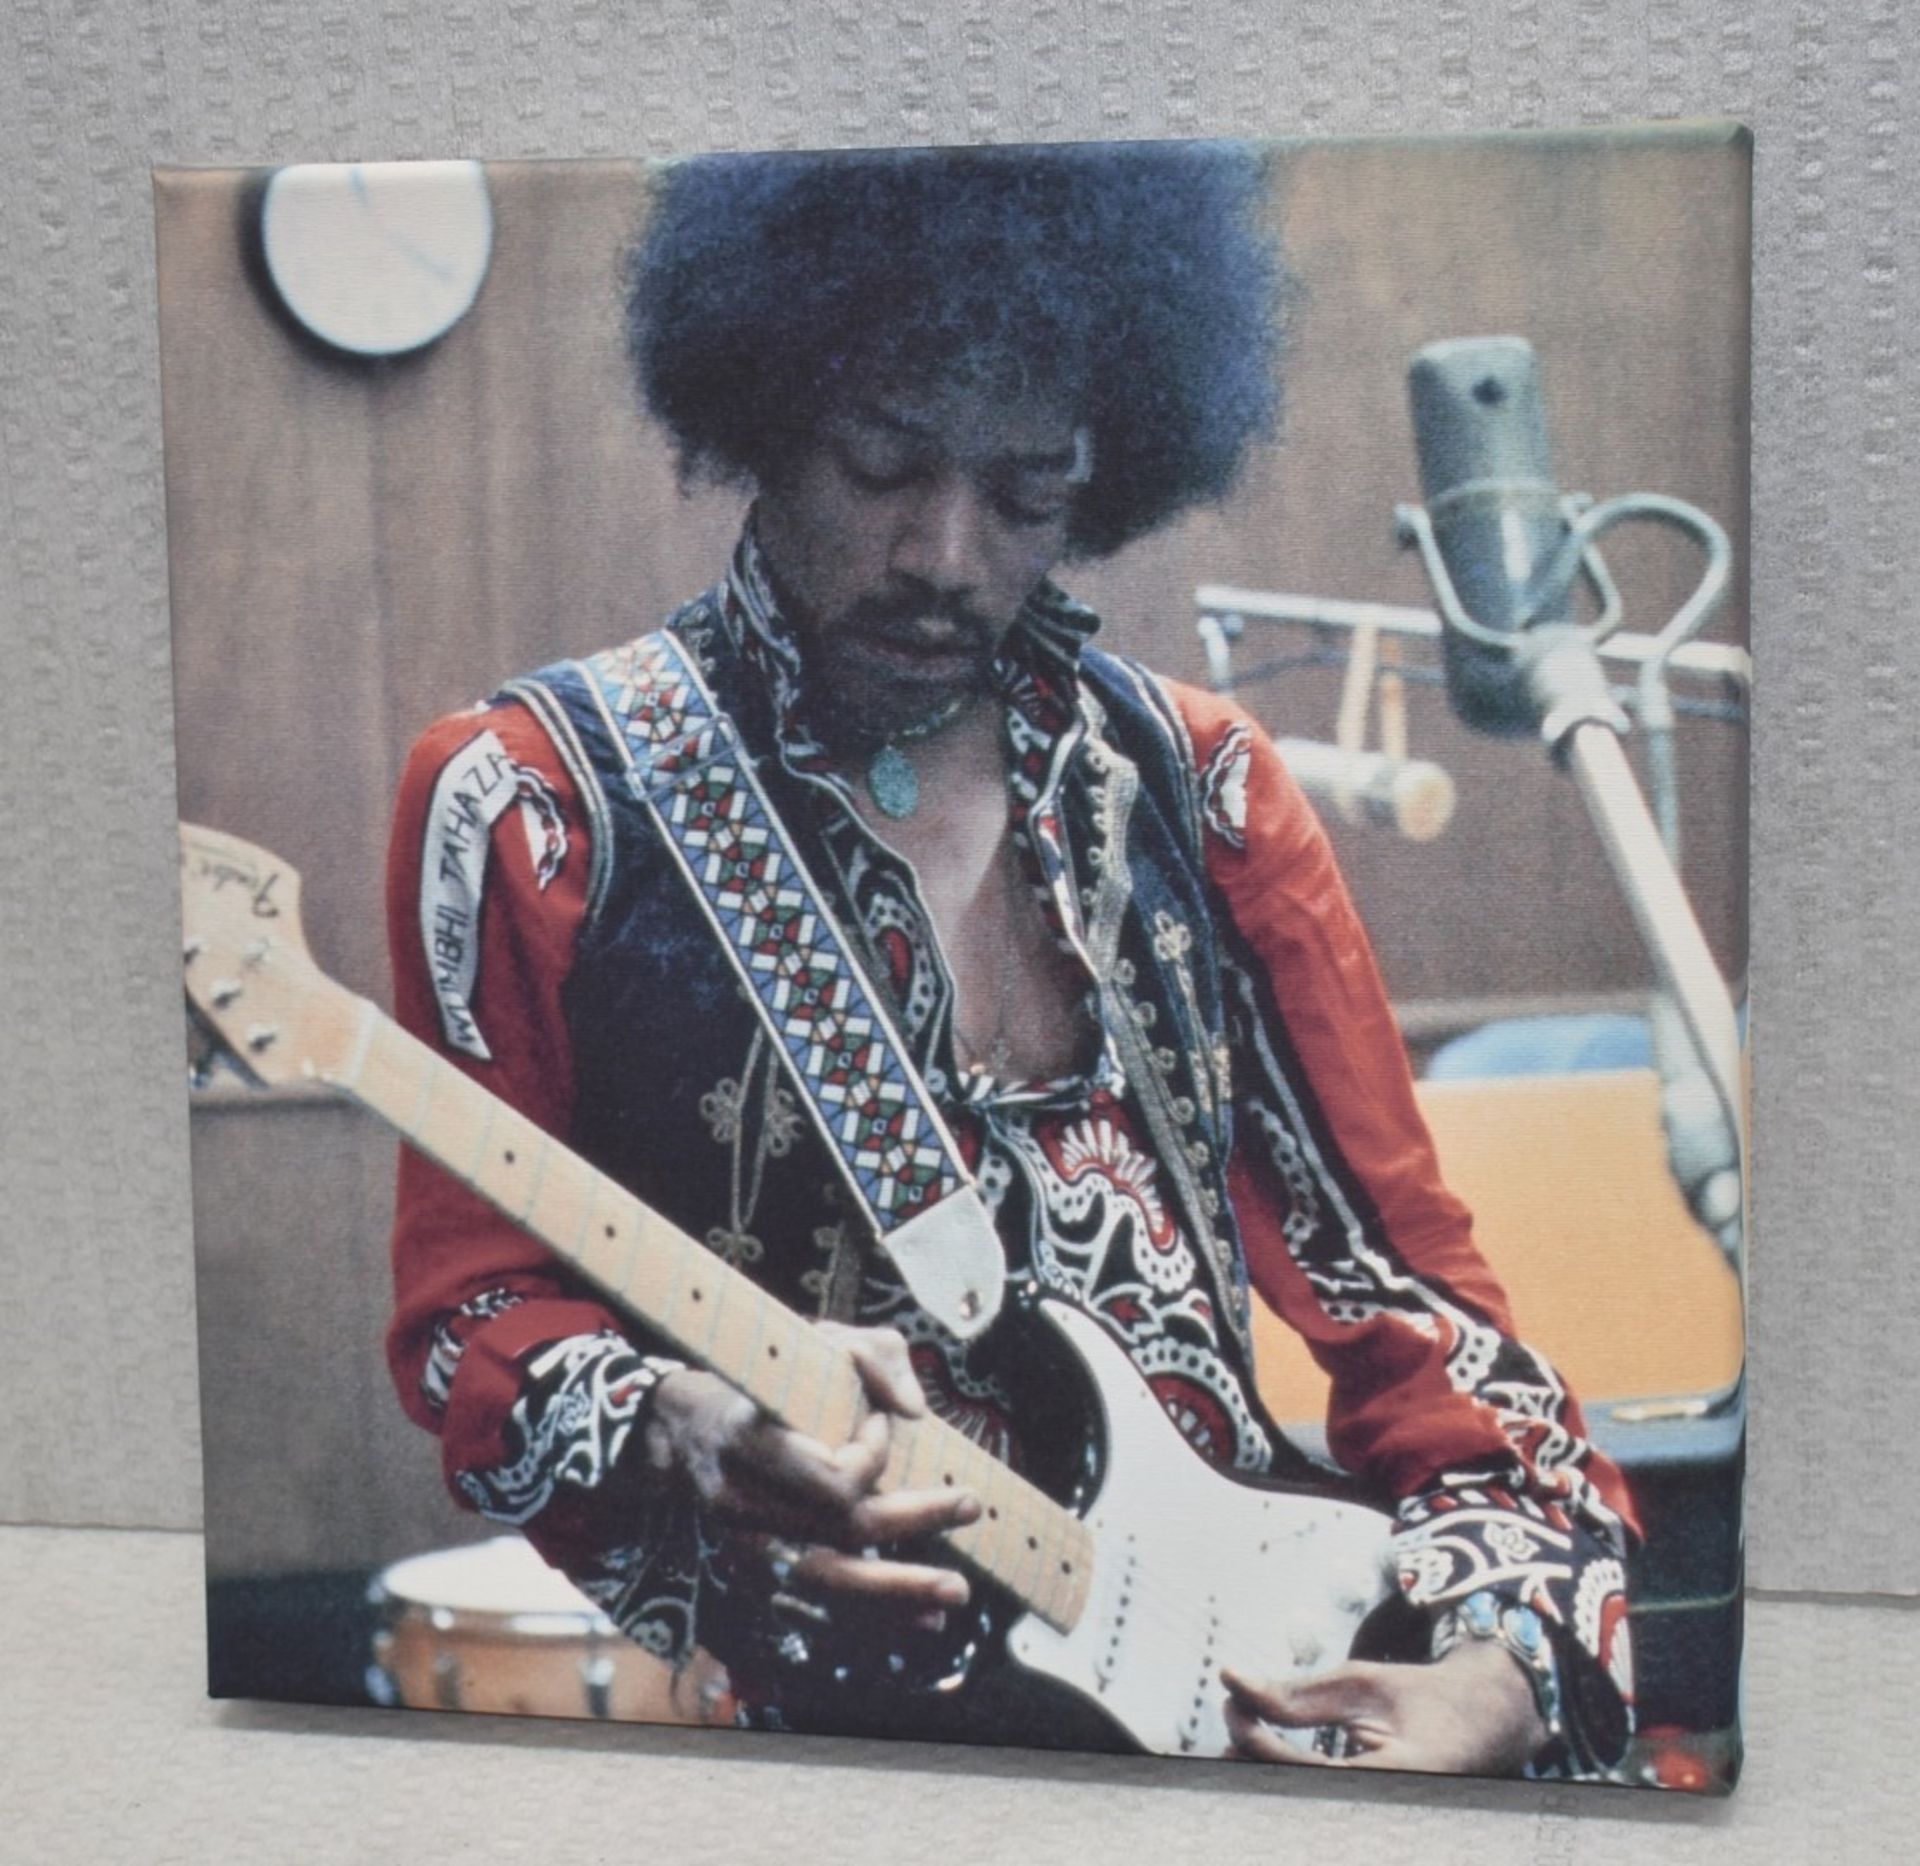 1 x Jimmy Hendrix Canvas Print Wall Picture - Size 40 x 40 cms - Officially Licensed Merchandise - Image 5 of 7